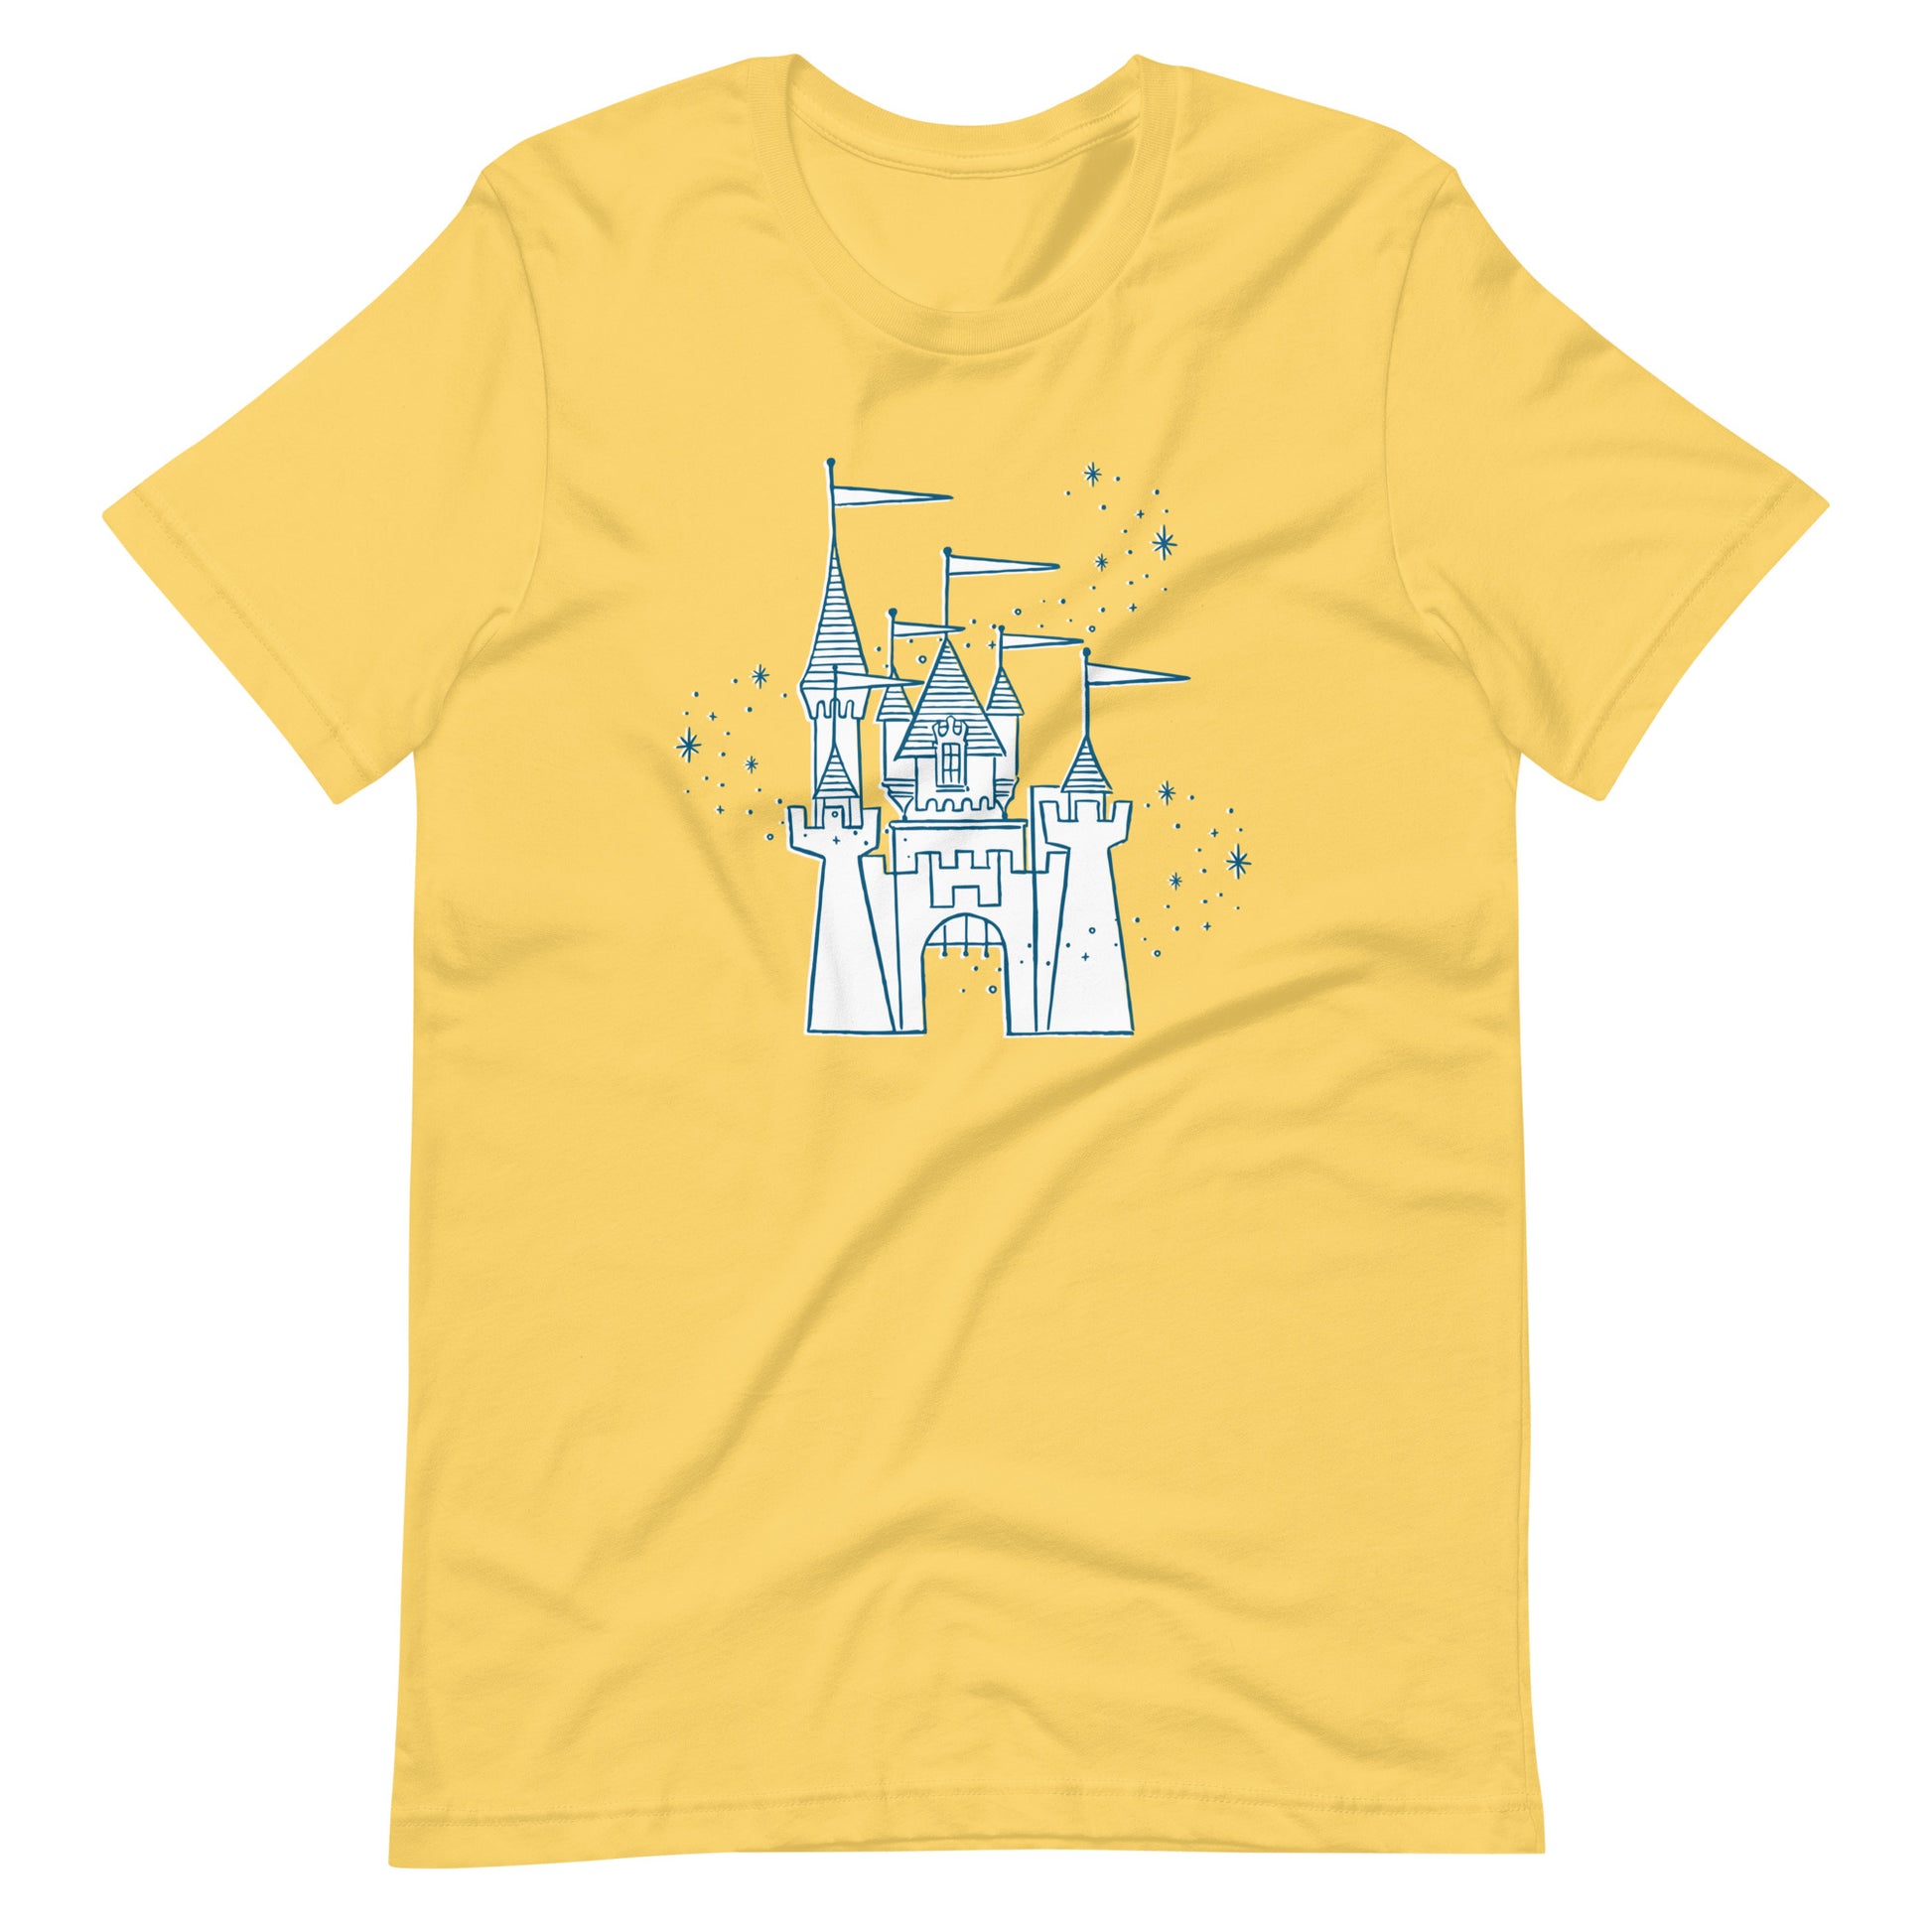 Yellow shirt printed with vintage style sketch of the Disneyland Castle and pixie dust above the castle.